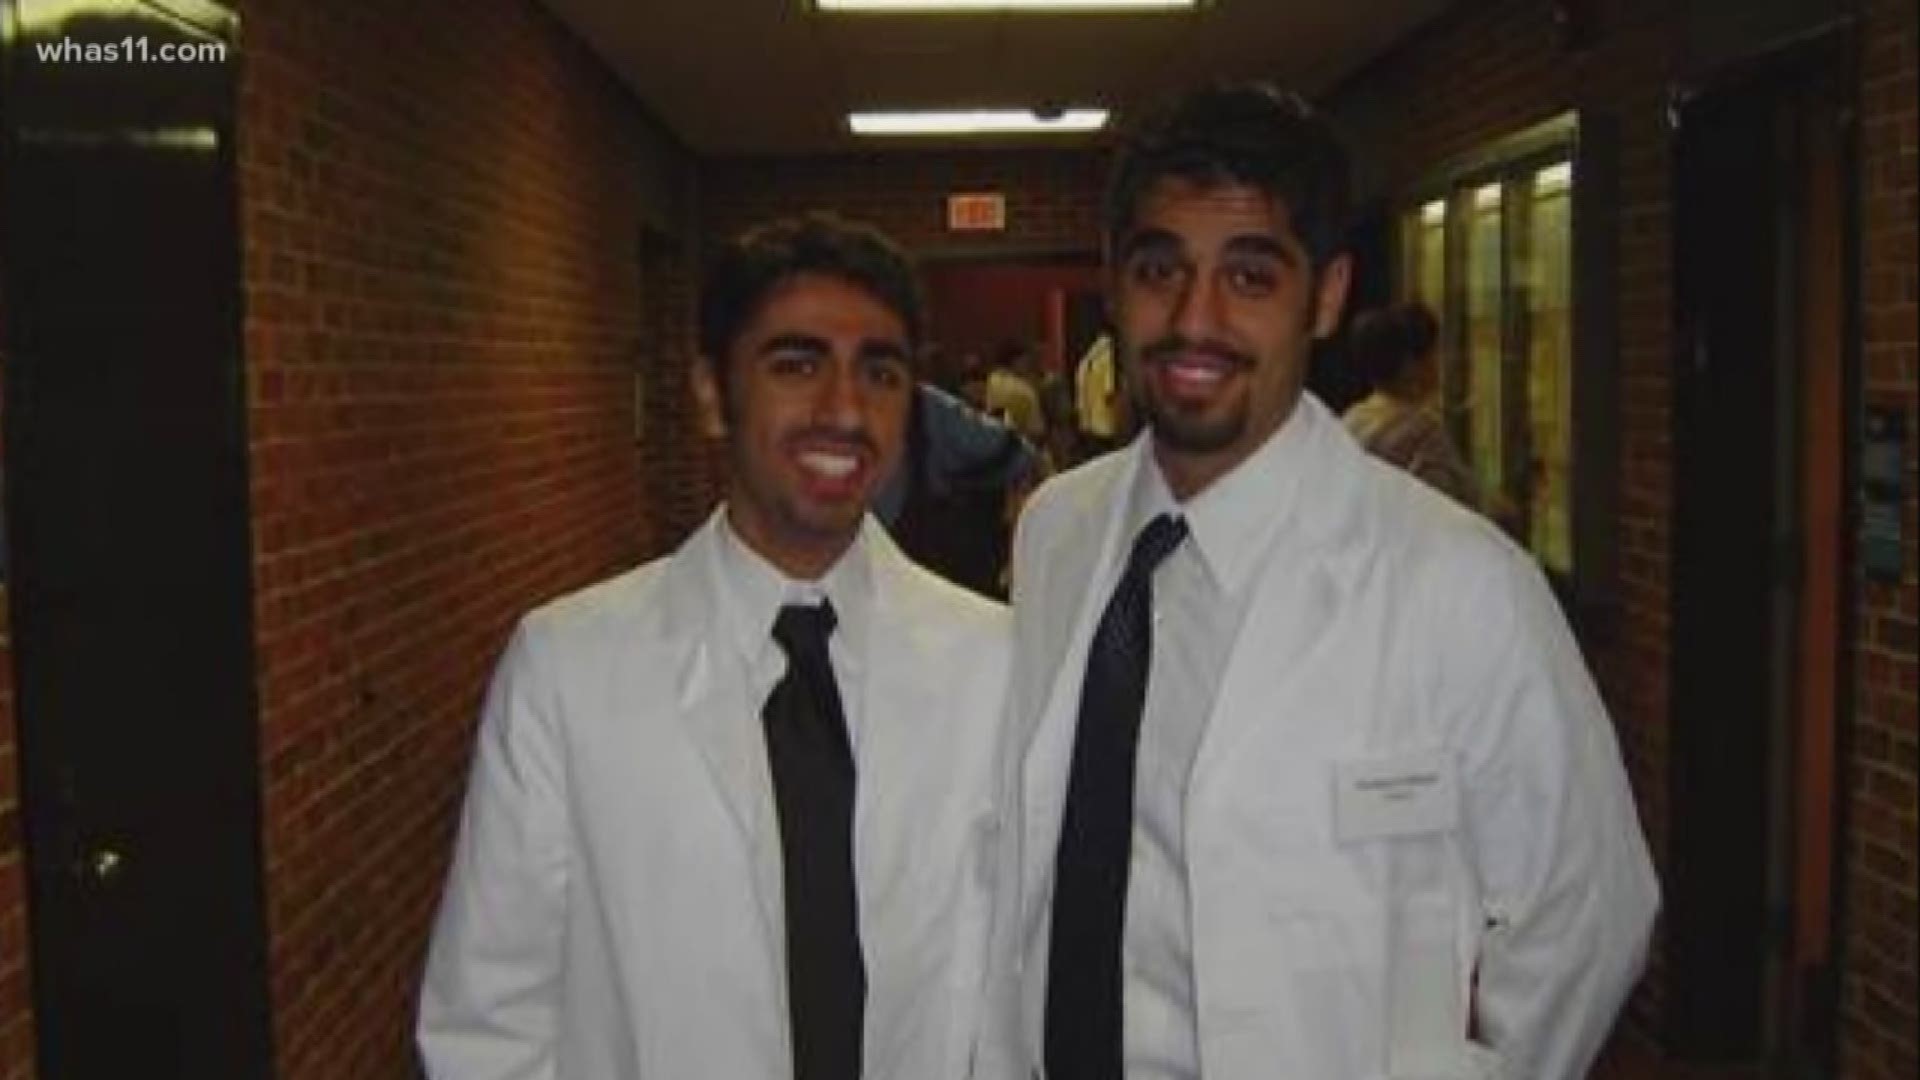 Doctors Mahan and Mayshan Ghiassi are also brothers. Born two years apart, now in the same profession, working at the same hospital, even in the same OR.